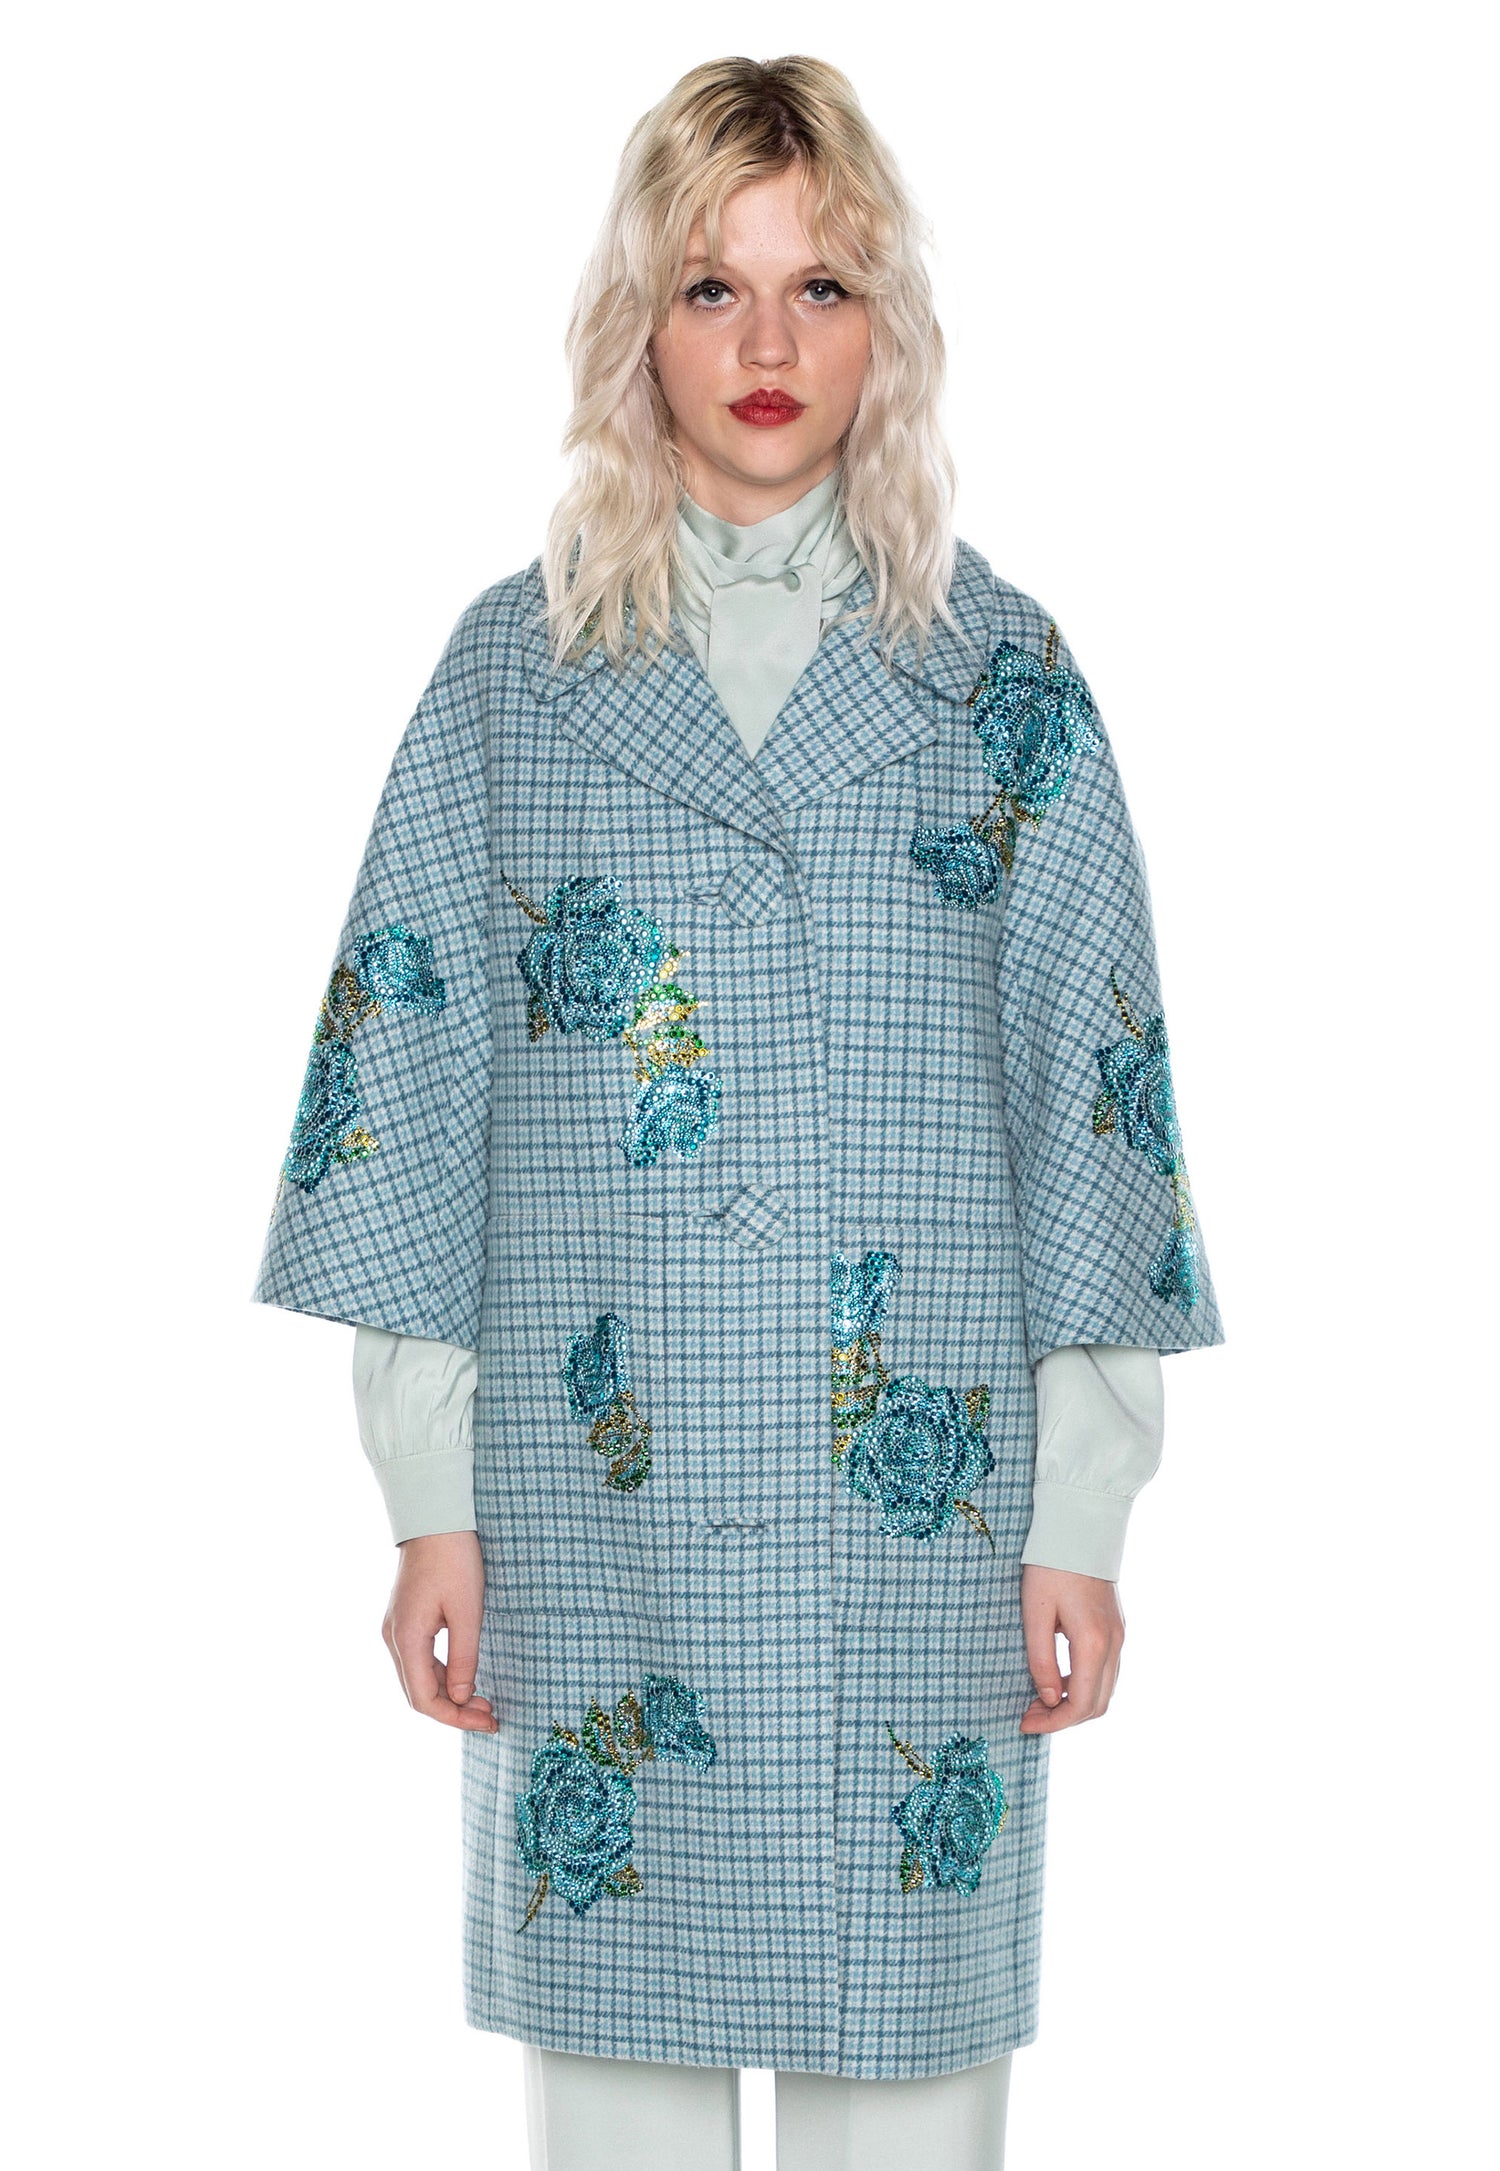 'PRINCE OF WHALES BLUEY BLUE' PATCH POCKET COAT - COATS - Libertine